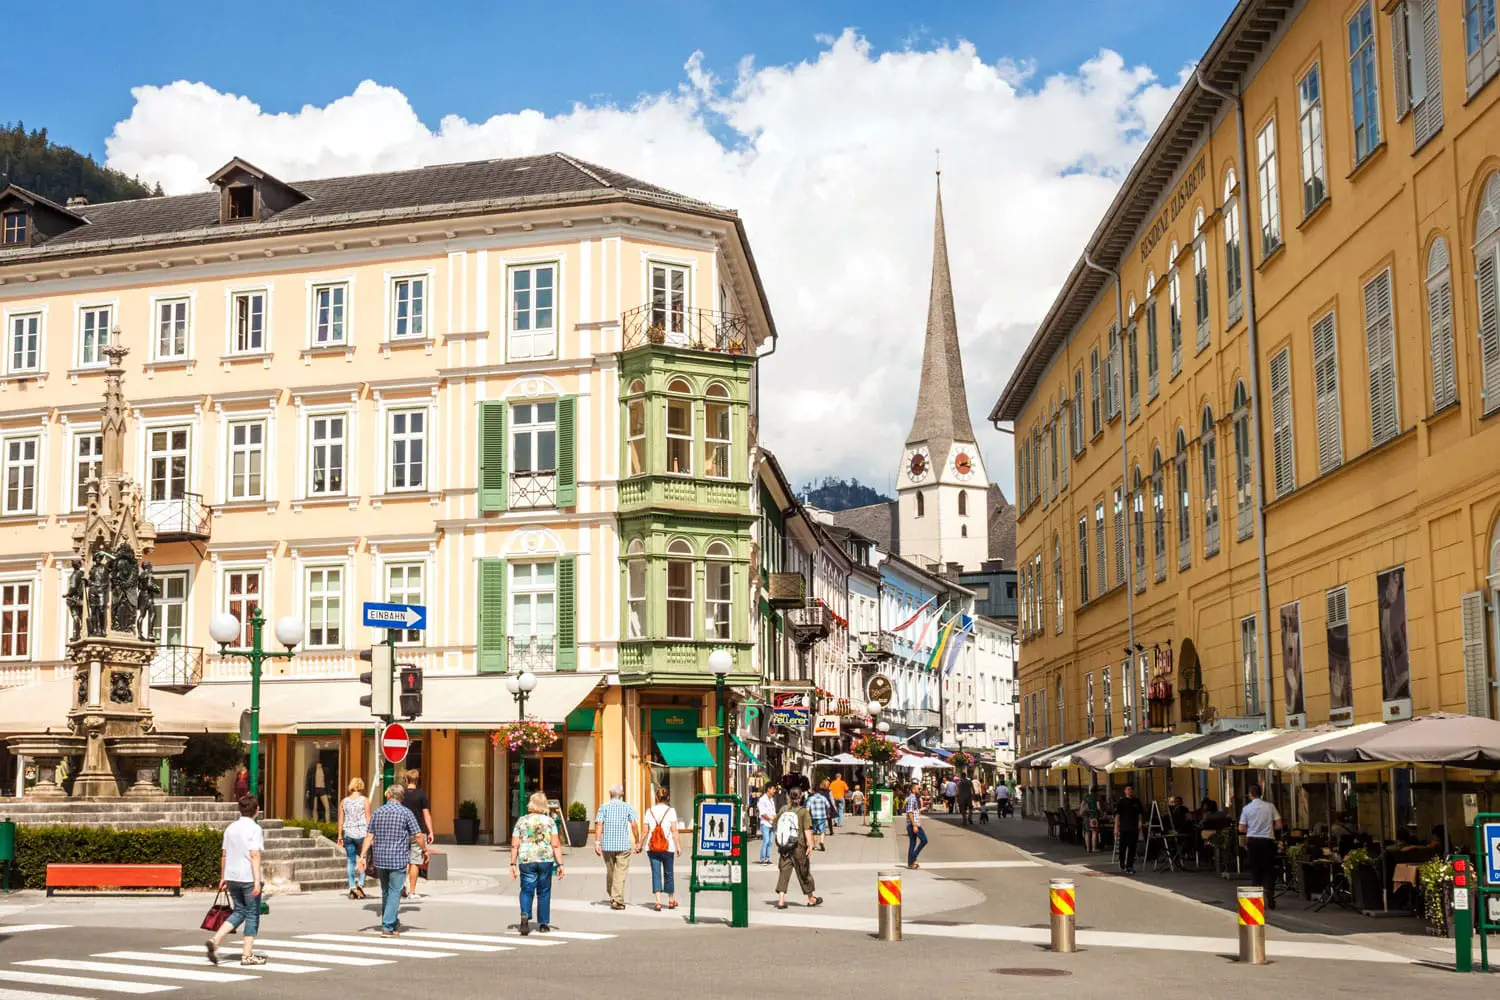 Schroepferplatz and Pfarrgasse, center of the resort town Bad Ischl, place for sightseeing, shopping and relaxing.